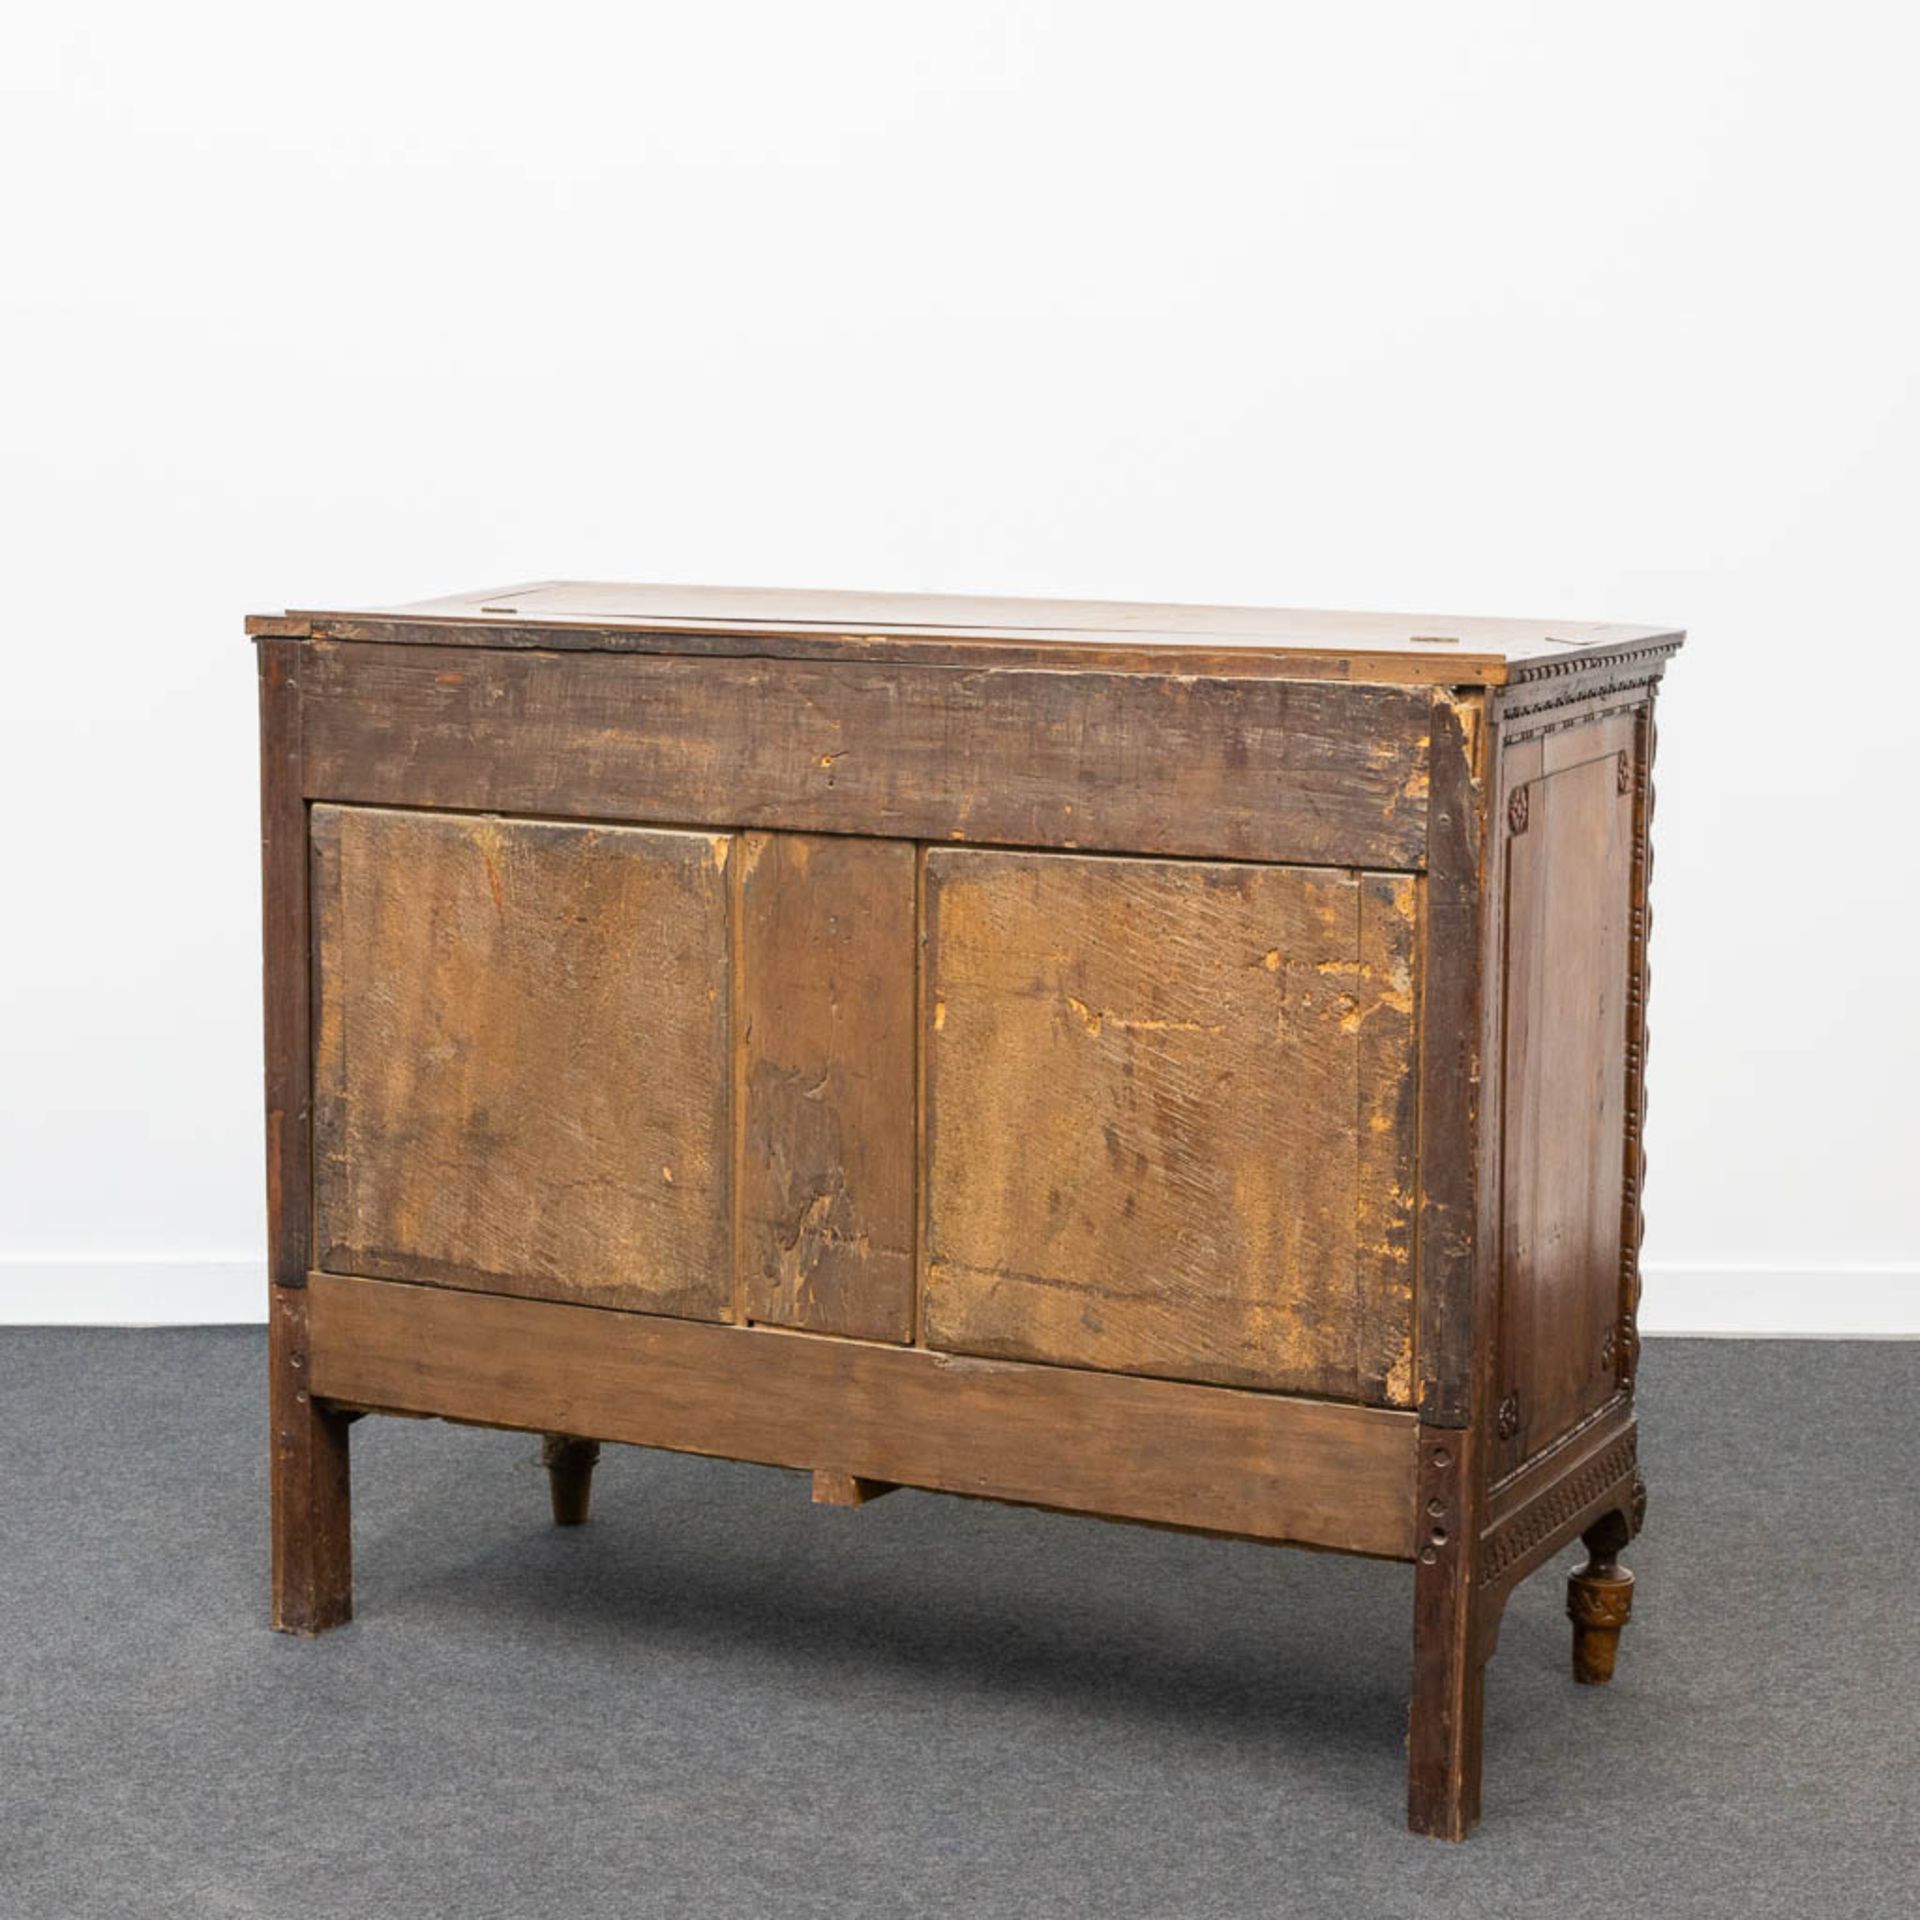 A wood sculptured commode in Louis XVI style, with 3 drawers and a hidden desk. 18th century. - Image 4 of 23